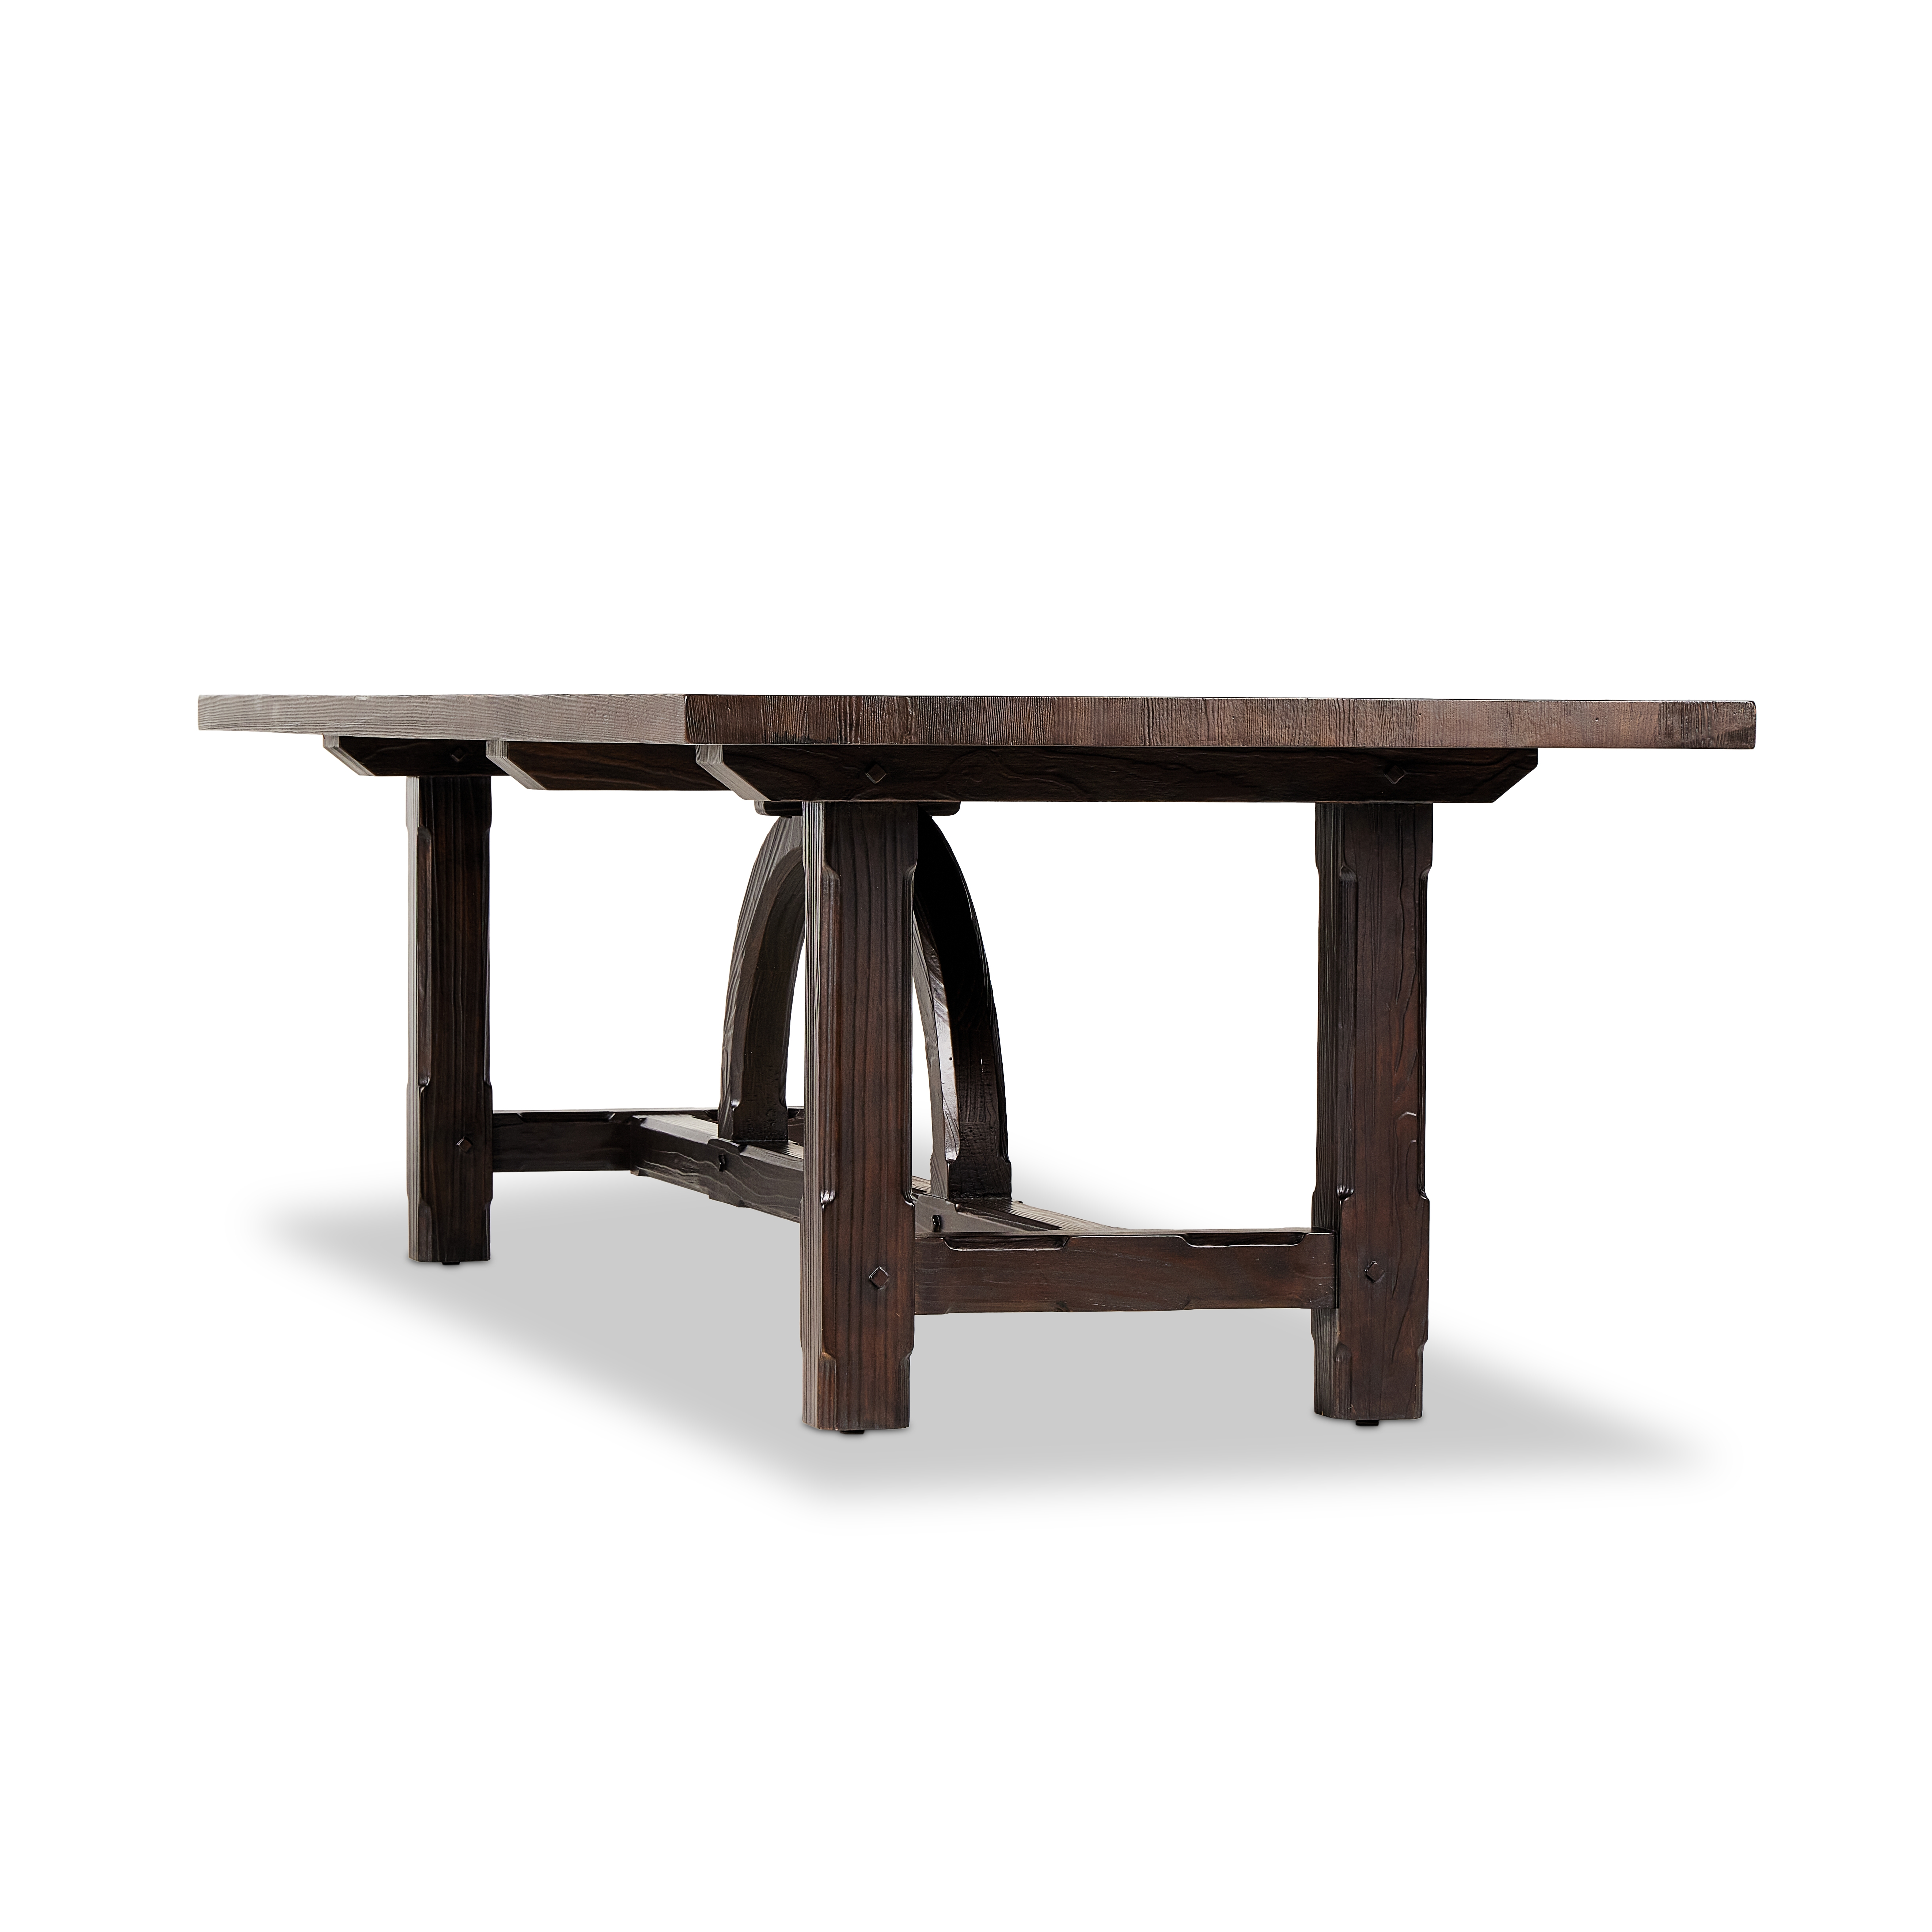 The Arch Dining Table-Medium Brown Fir - Image 12